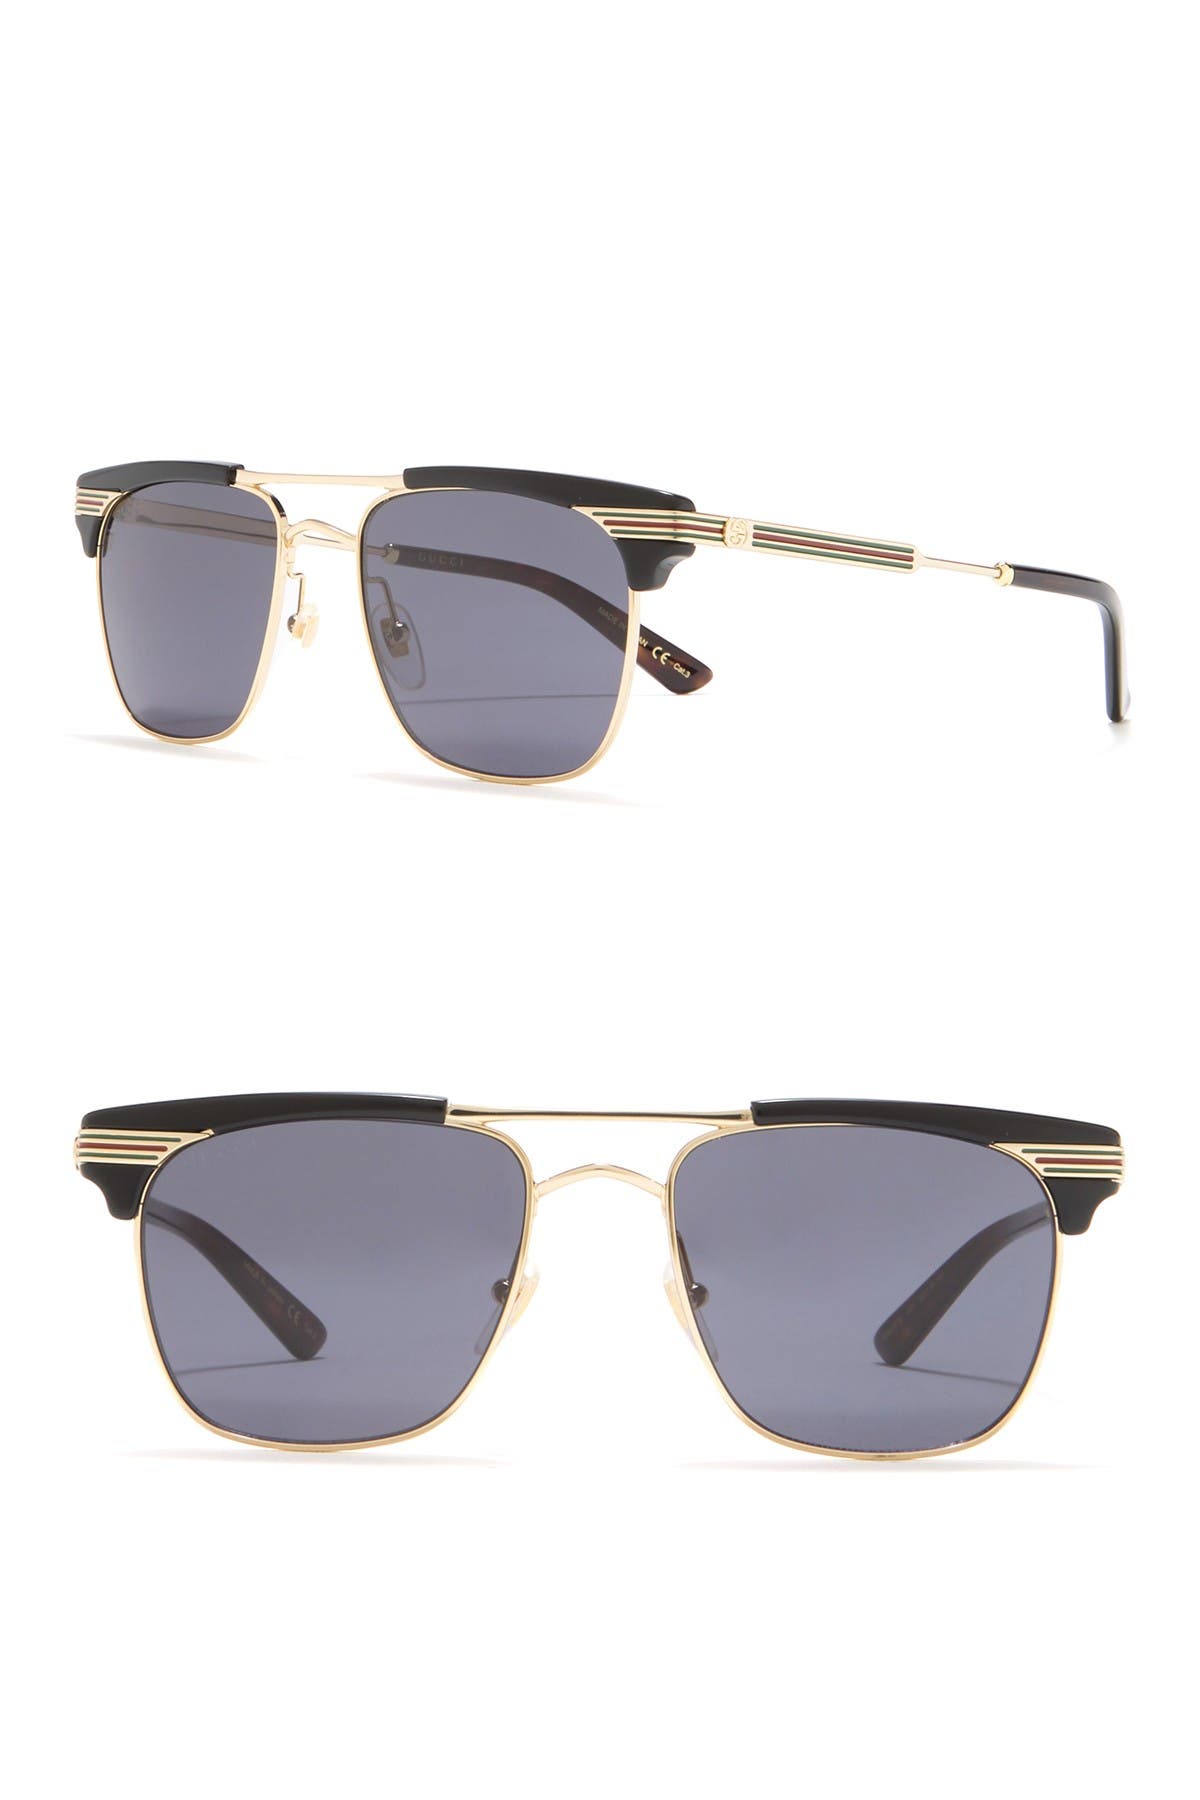 GUCCI | 52mm Clubmaster Sunglasses | Nordstrom Rack